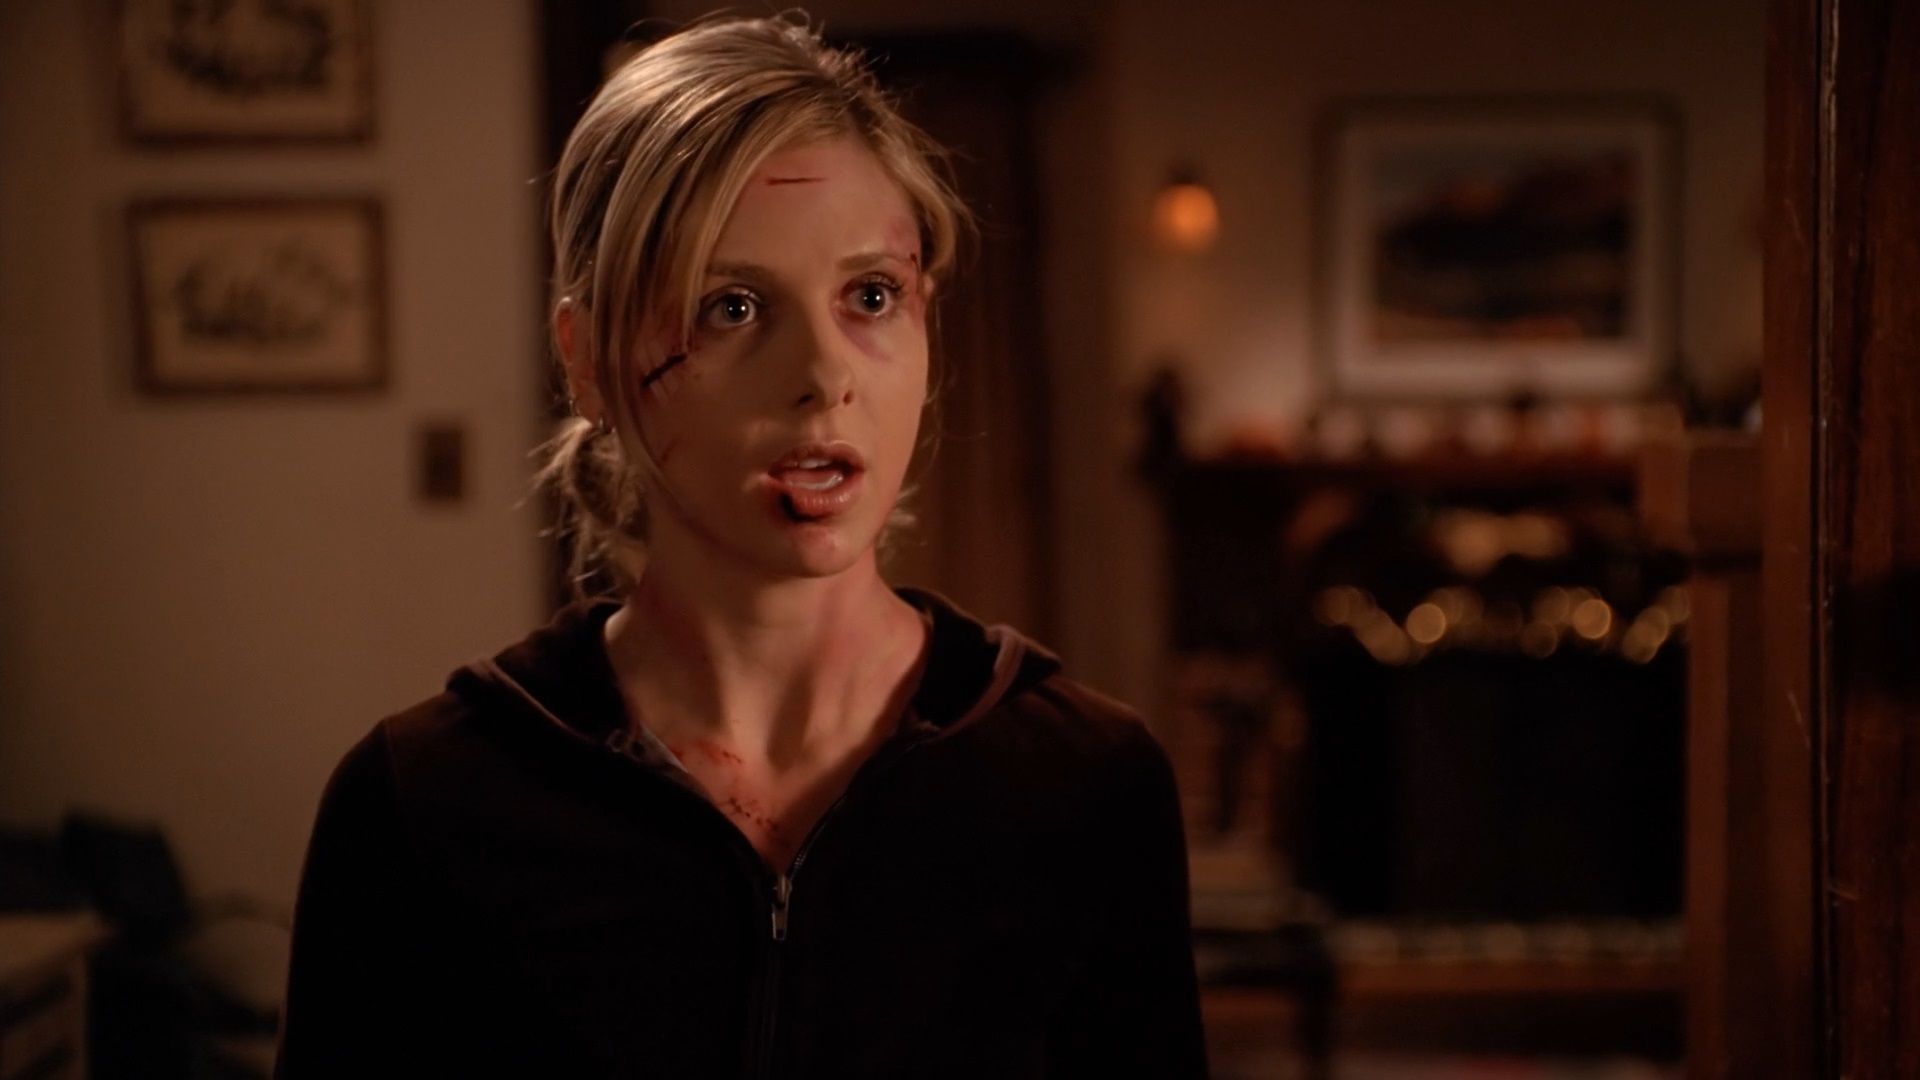 Buffy in the episode "Bring On The Night".